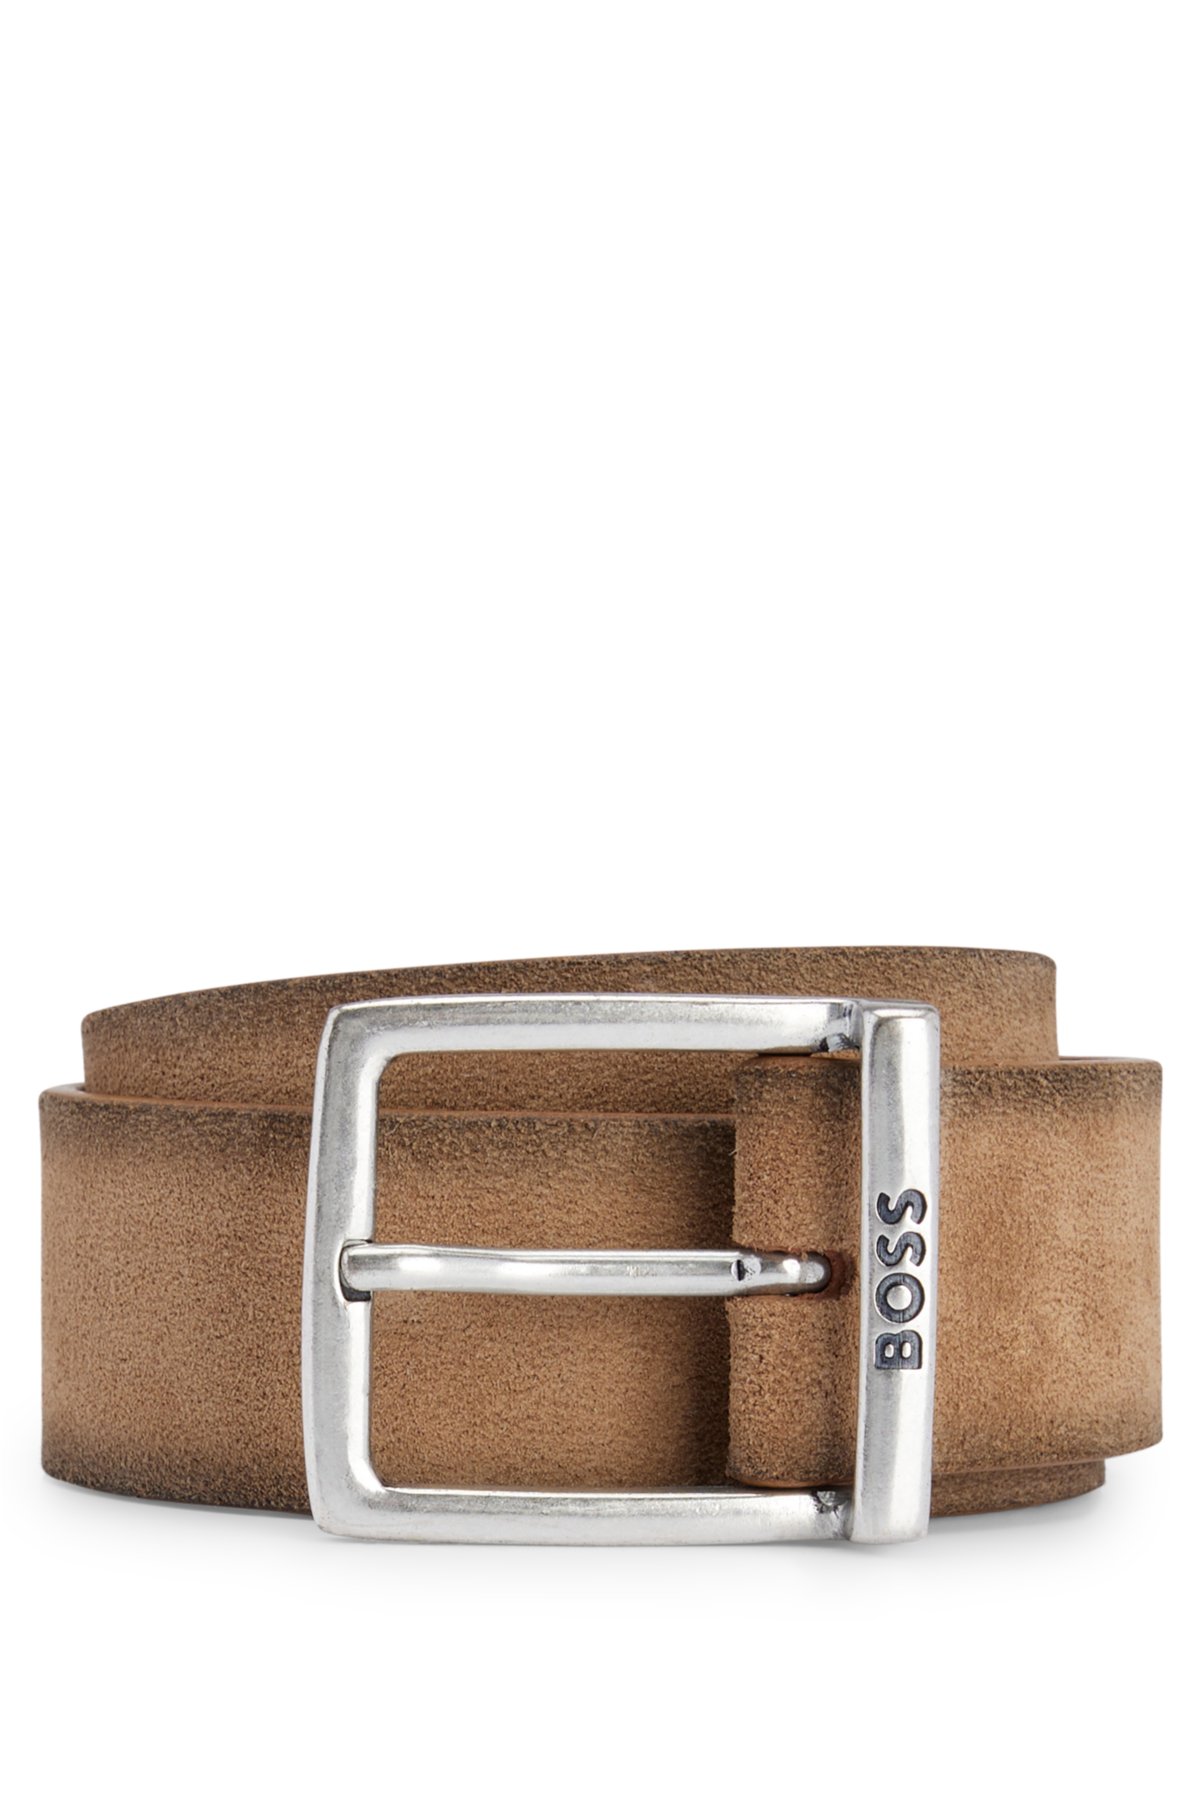 BOSS buckle and - logo with squared Suede engraved belt